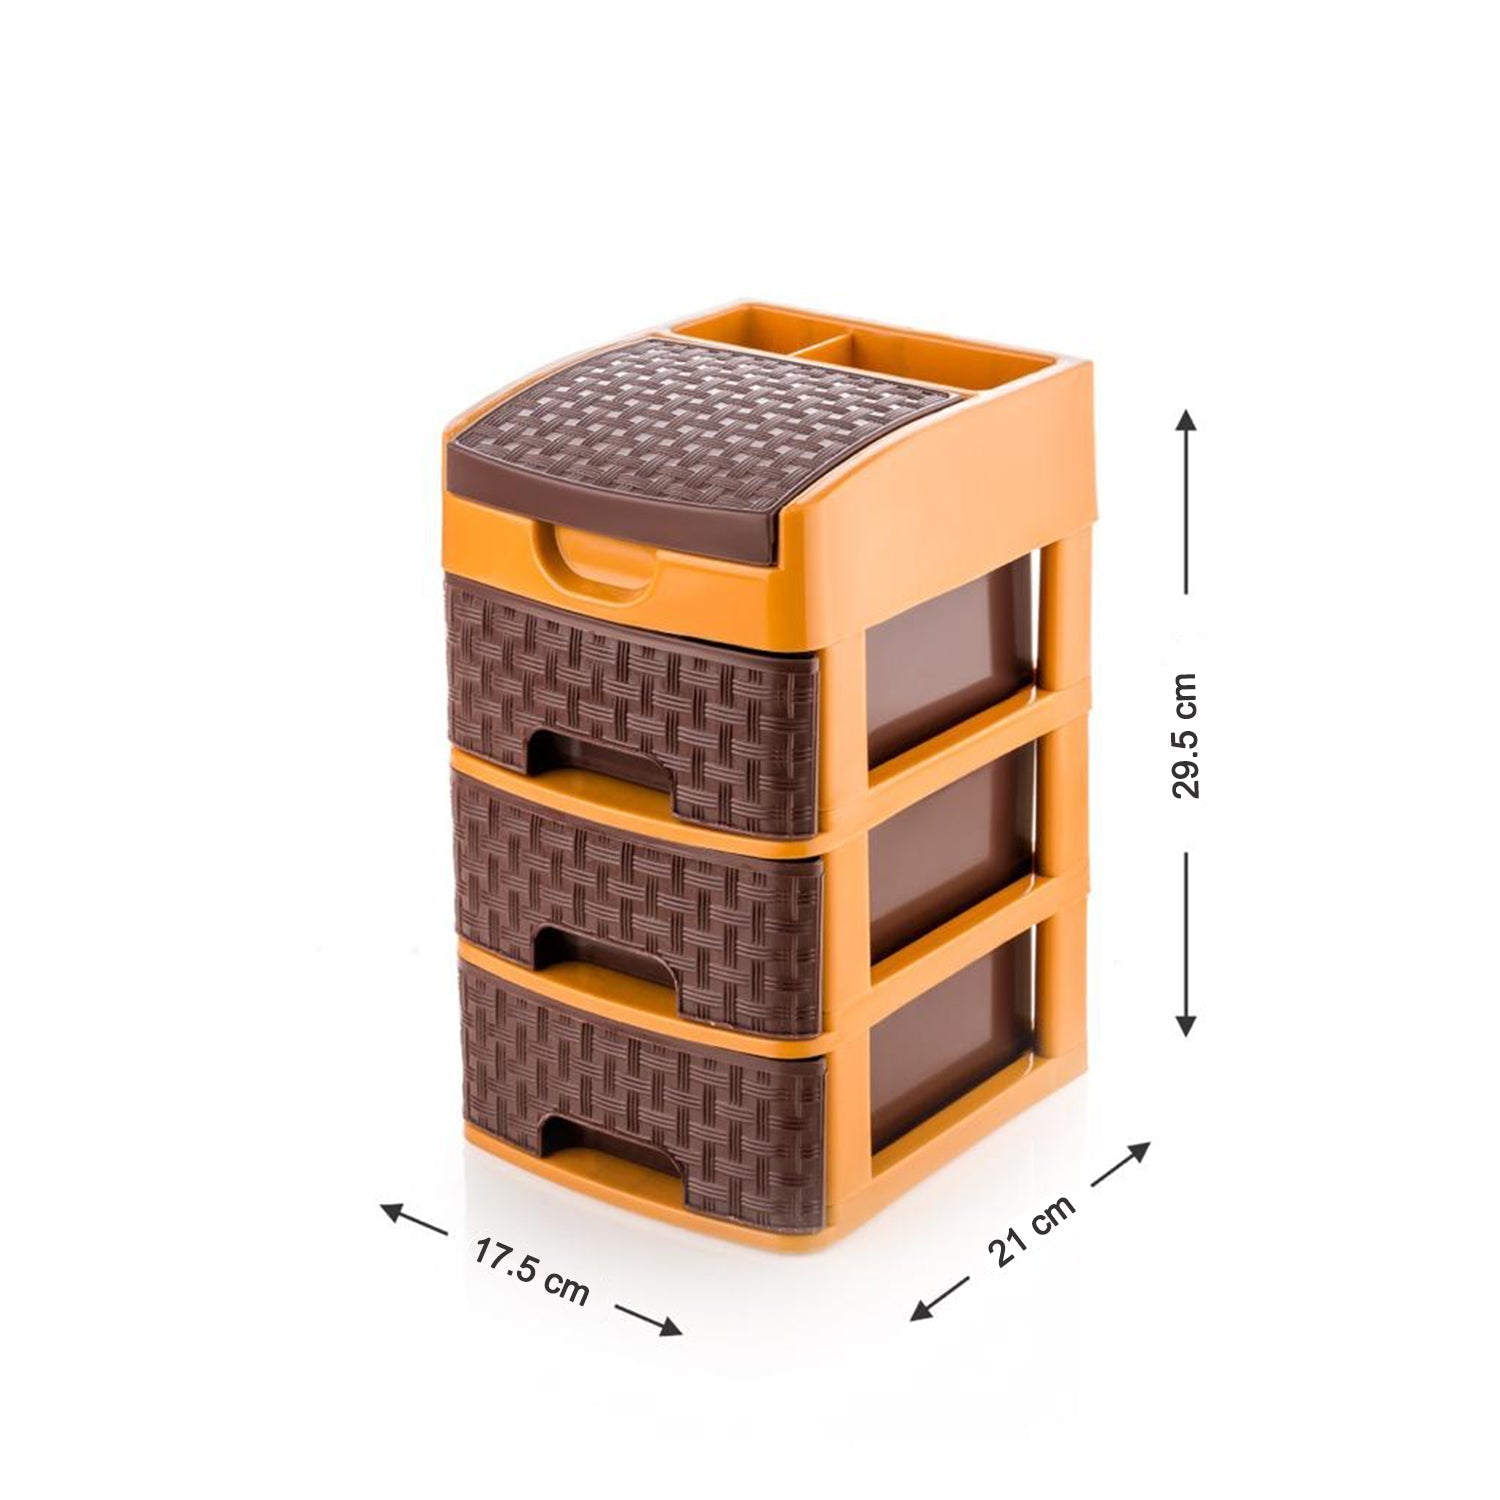 4792 Mini 3 Layer D Storage used in all kinds of household and official places for storing of various types of stuffs and items etc.